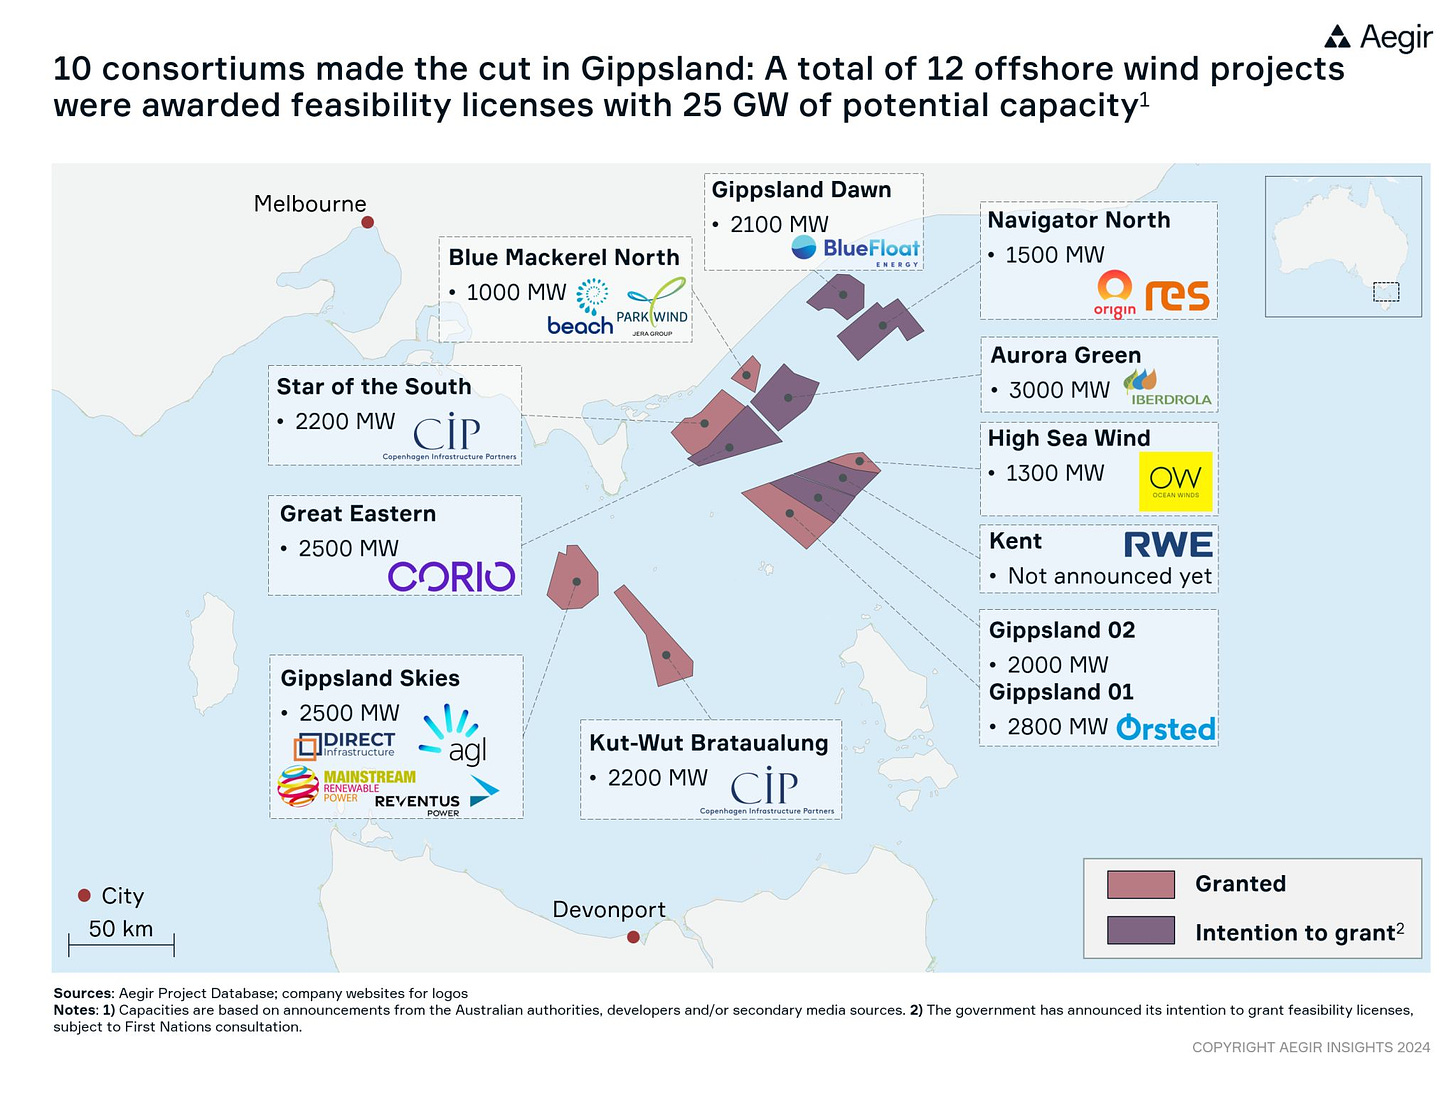 Map by Aegir Insights showing offshore wind projects off Australia. 10 consortiums made the cut in Gippsland: A total of 12 offshore wind porjects were awarded feasibility licenses with 25 GW of potential capacity.